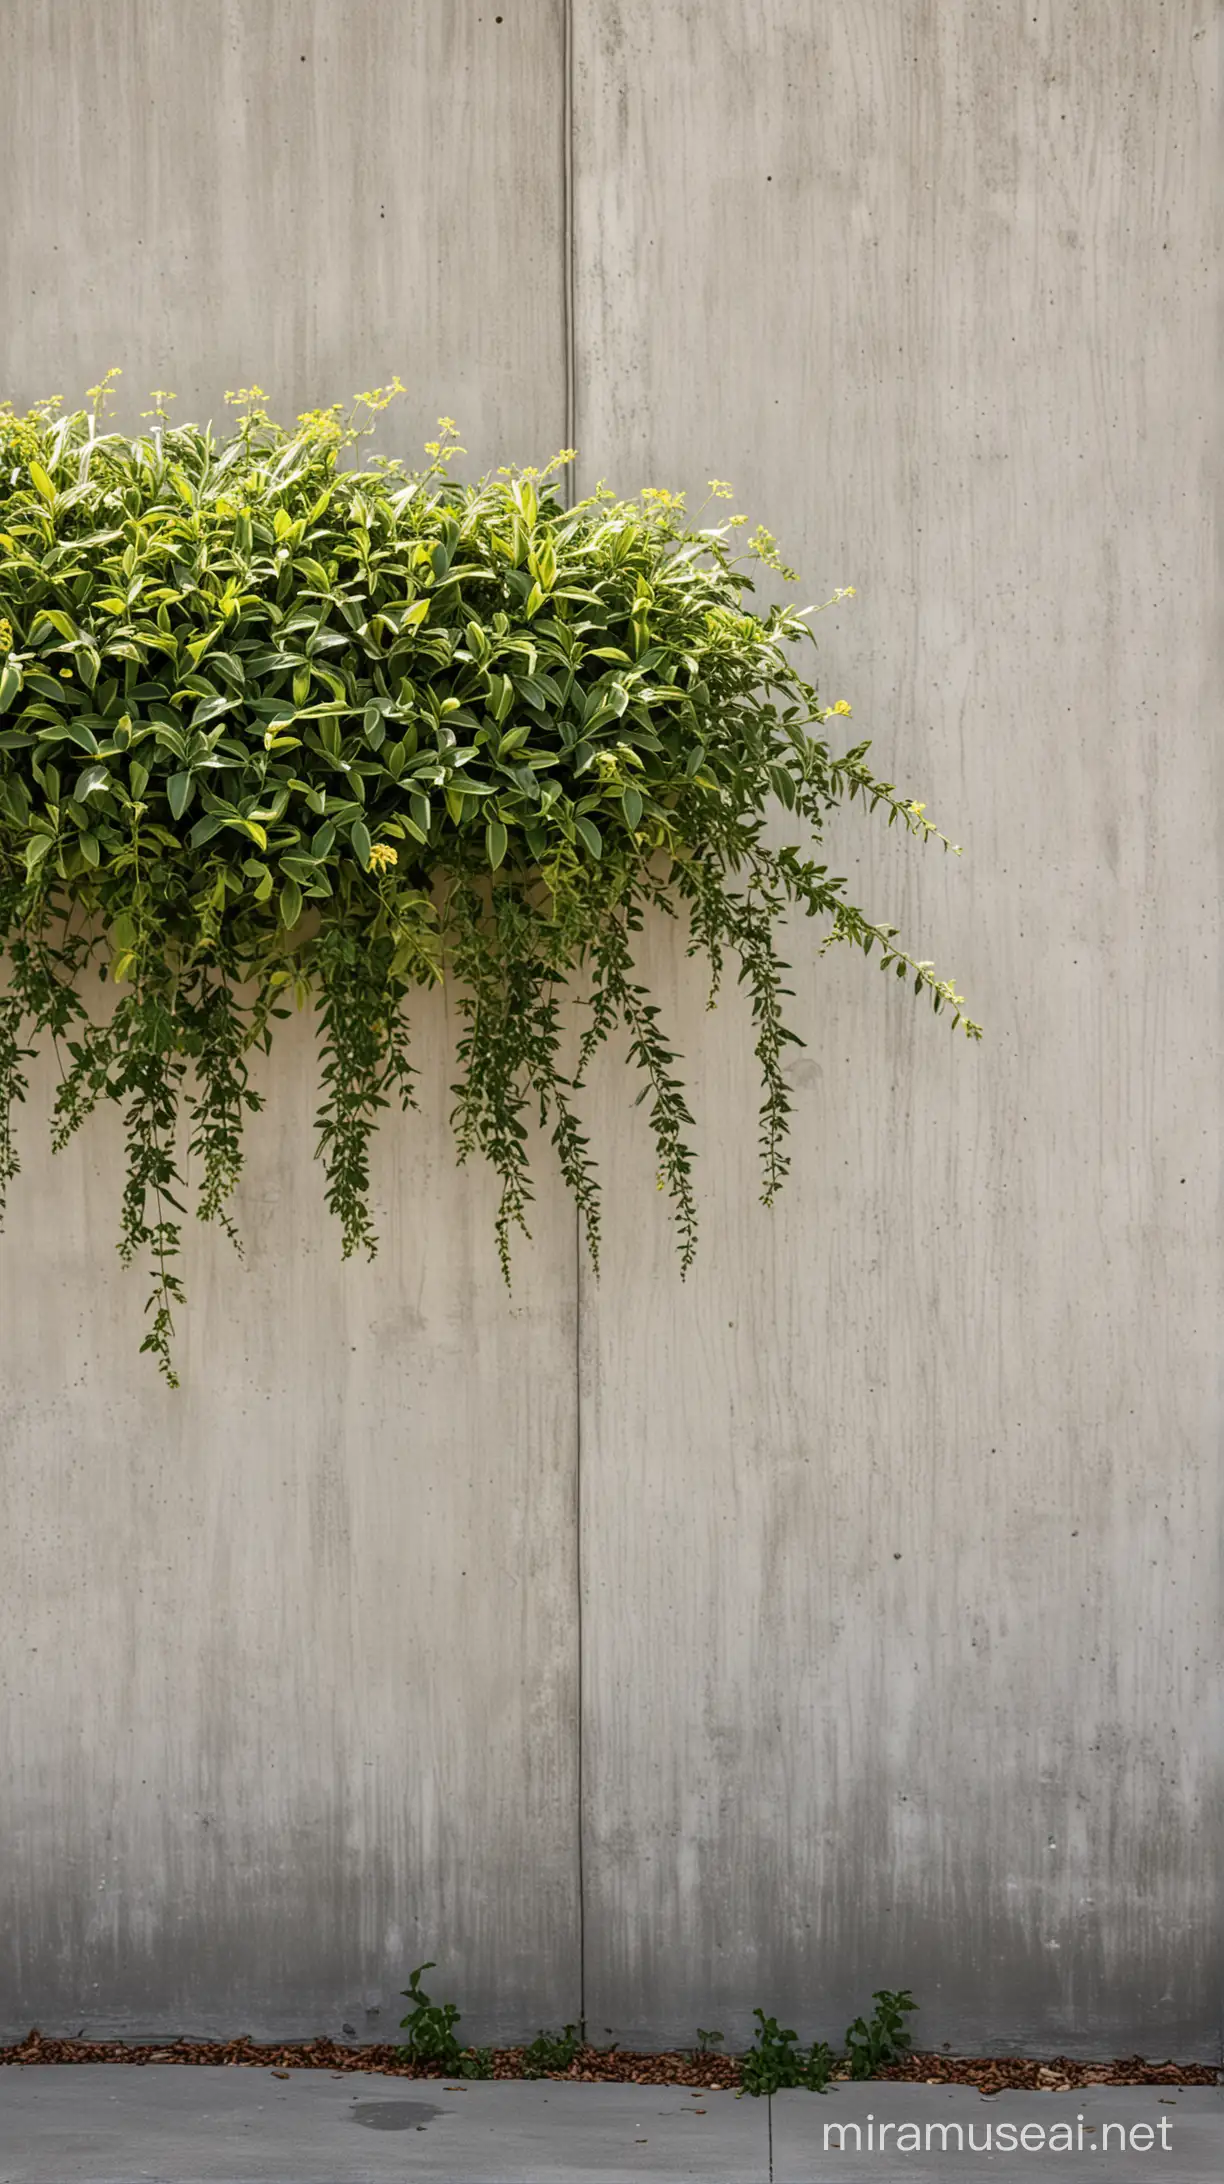 Sunny Day with Concrete Wall and Plants